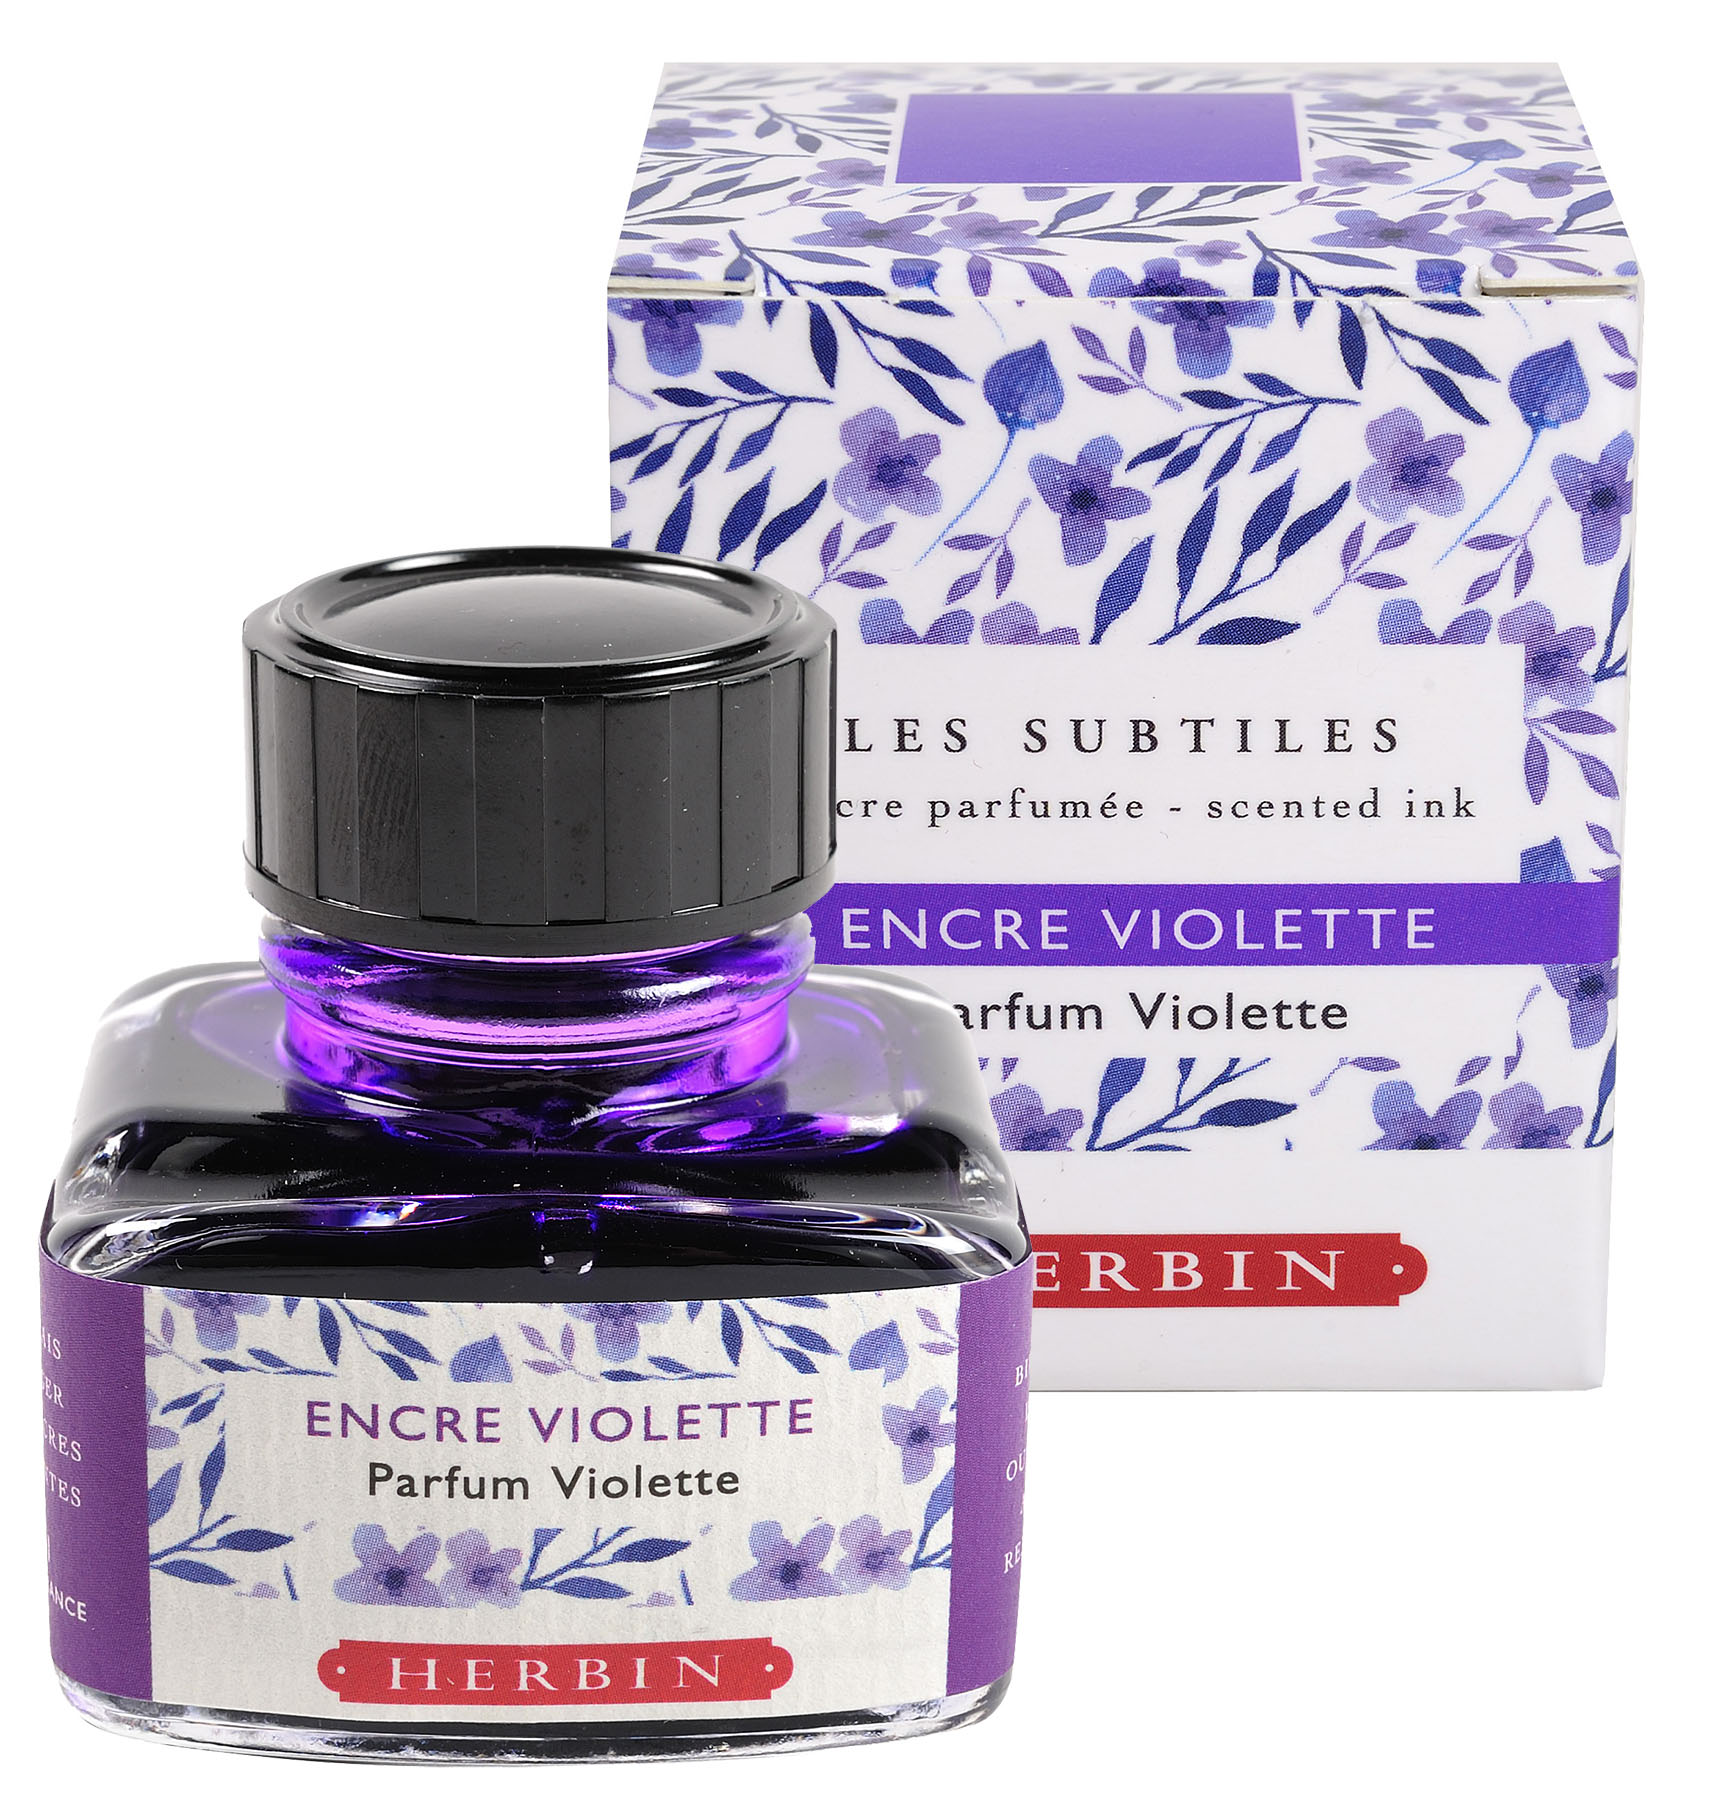 Violet-scented Fountain Pen Ink